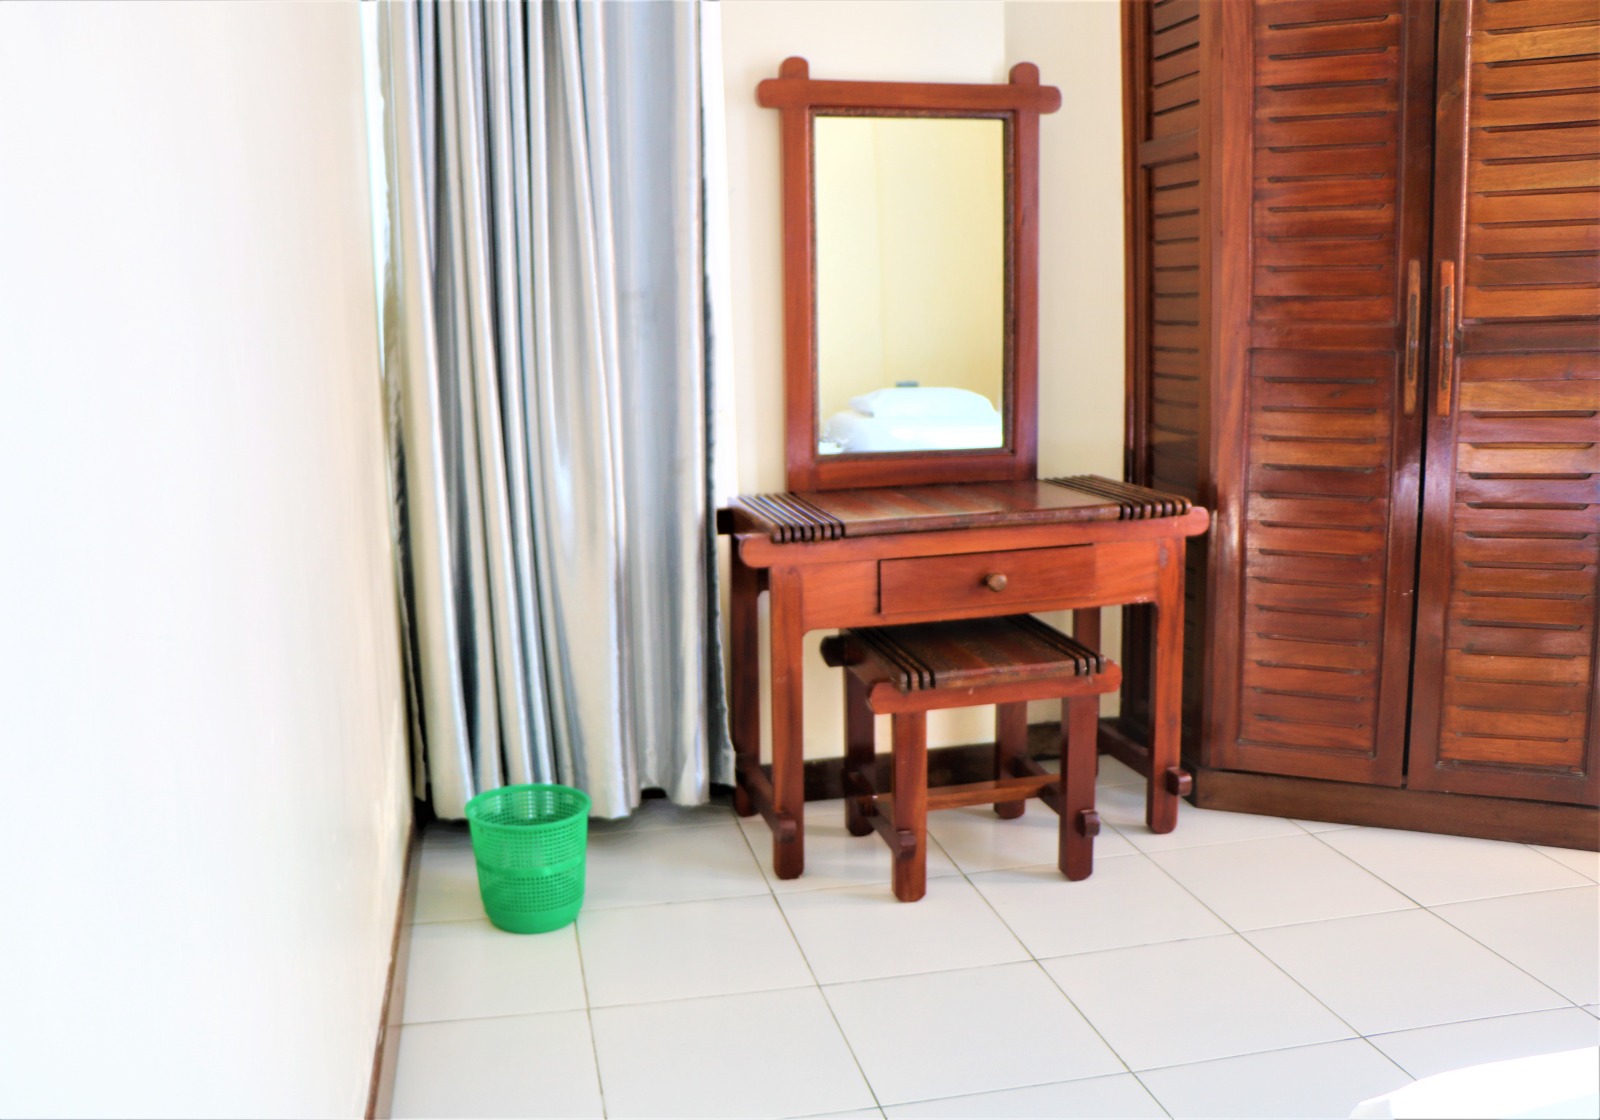 Beach front 2bedroom vacation apartment Mombasa. Affordable furnished Hotel for vacation in Mombasa | Zuru Life Africa